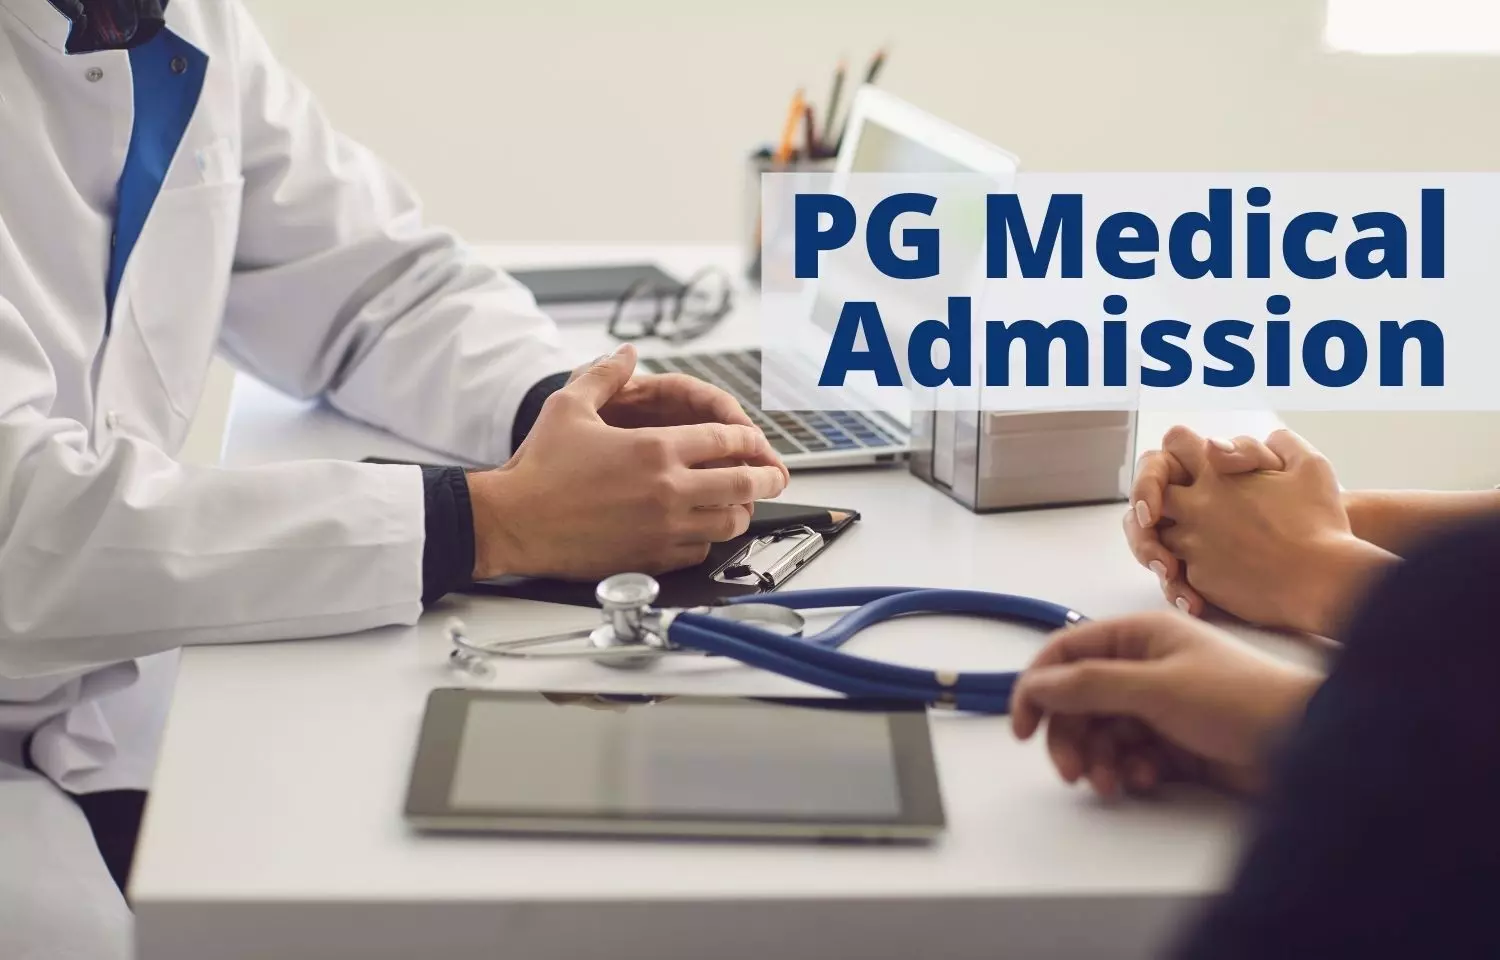 PG Medical Admissions 2021: DMER Haryana releases Schedule of Mop up Round, Details